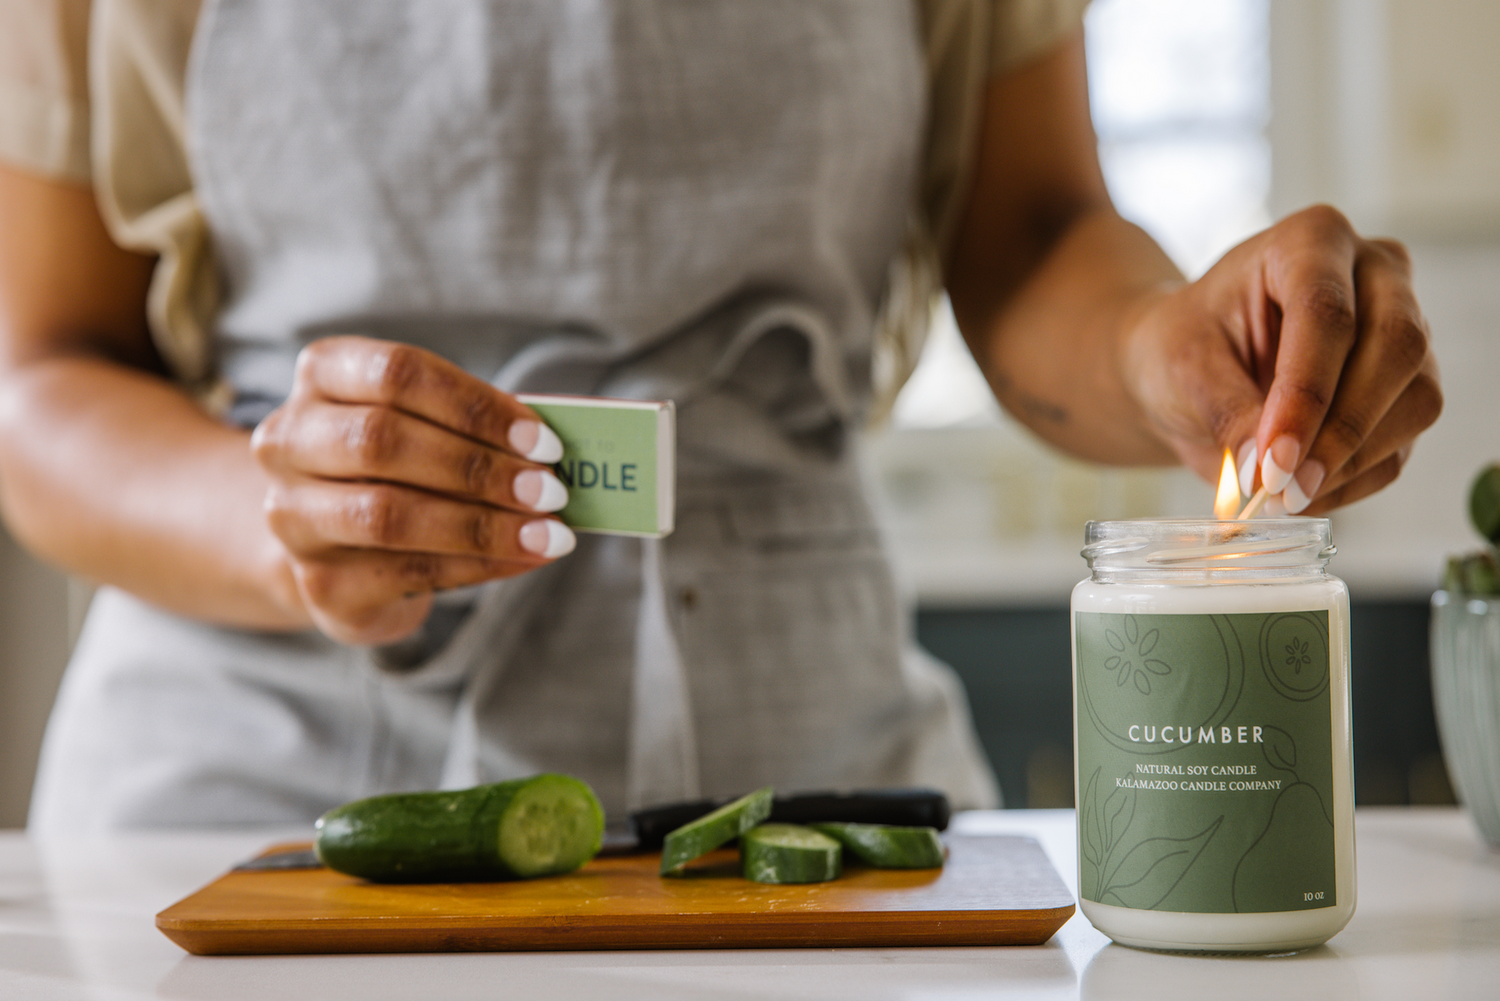 Hand lighting a cucumber candle with a match.